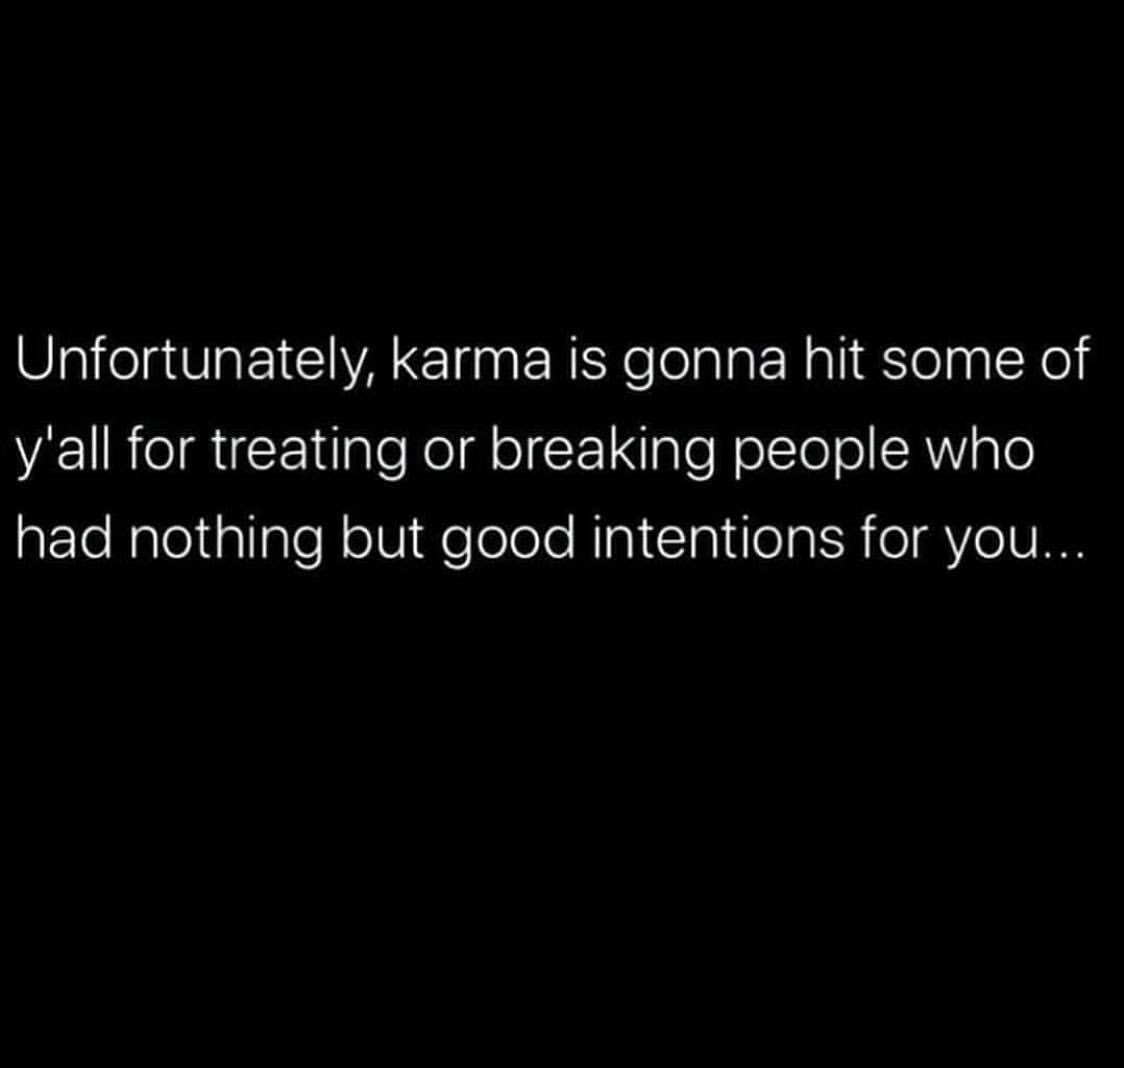 Unfortunately, karma is gonna hit some of y'all for treating or breaking people who had nothing but good intentions for you.